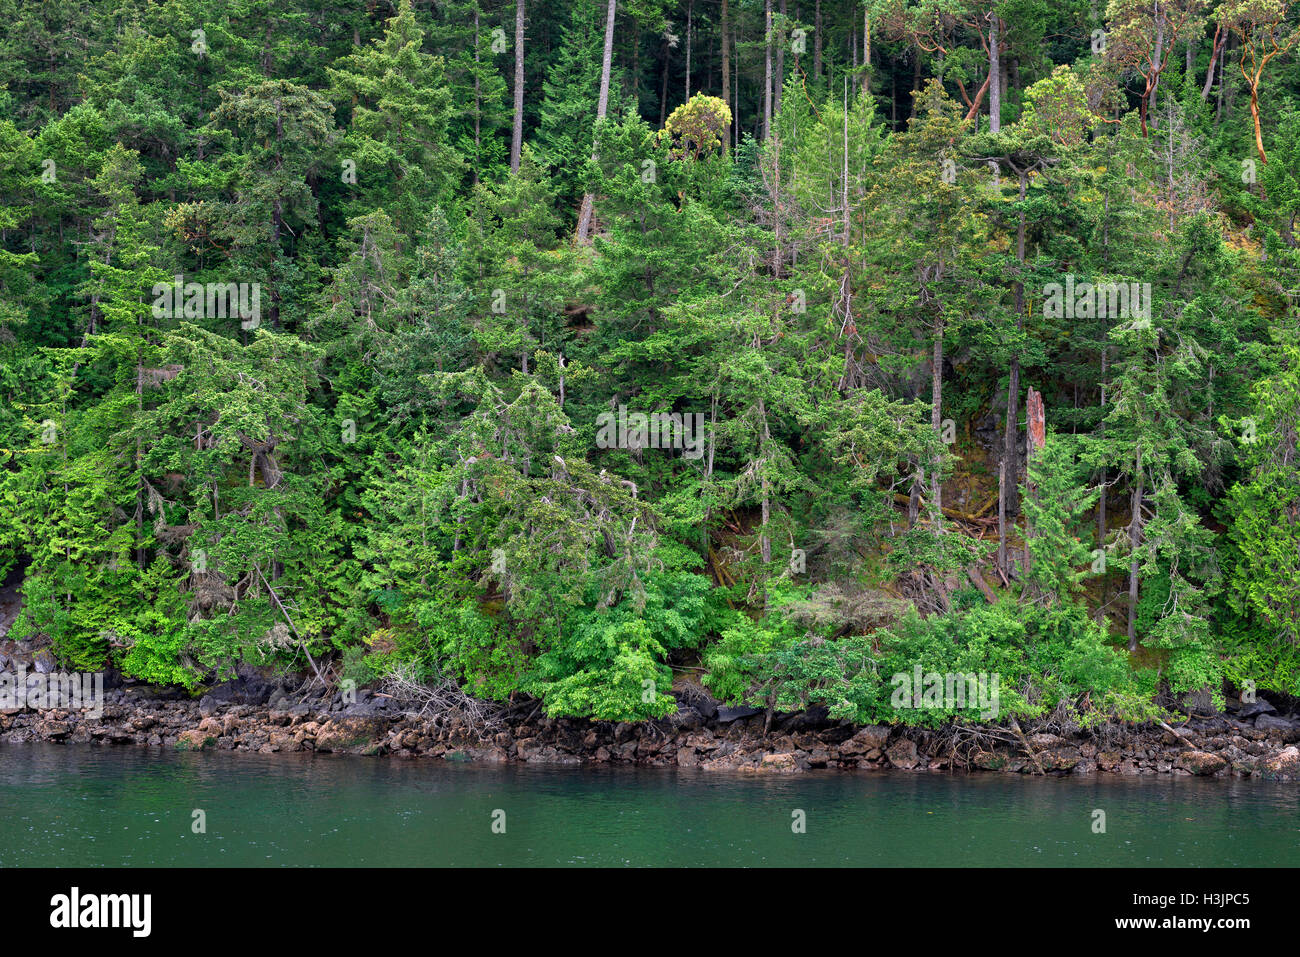 USA, Washington, San Juan Islands, Shaw Island, Forest of Douglas fir with scattered Pacific madrone trees above rocky shoreline Stock Photo